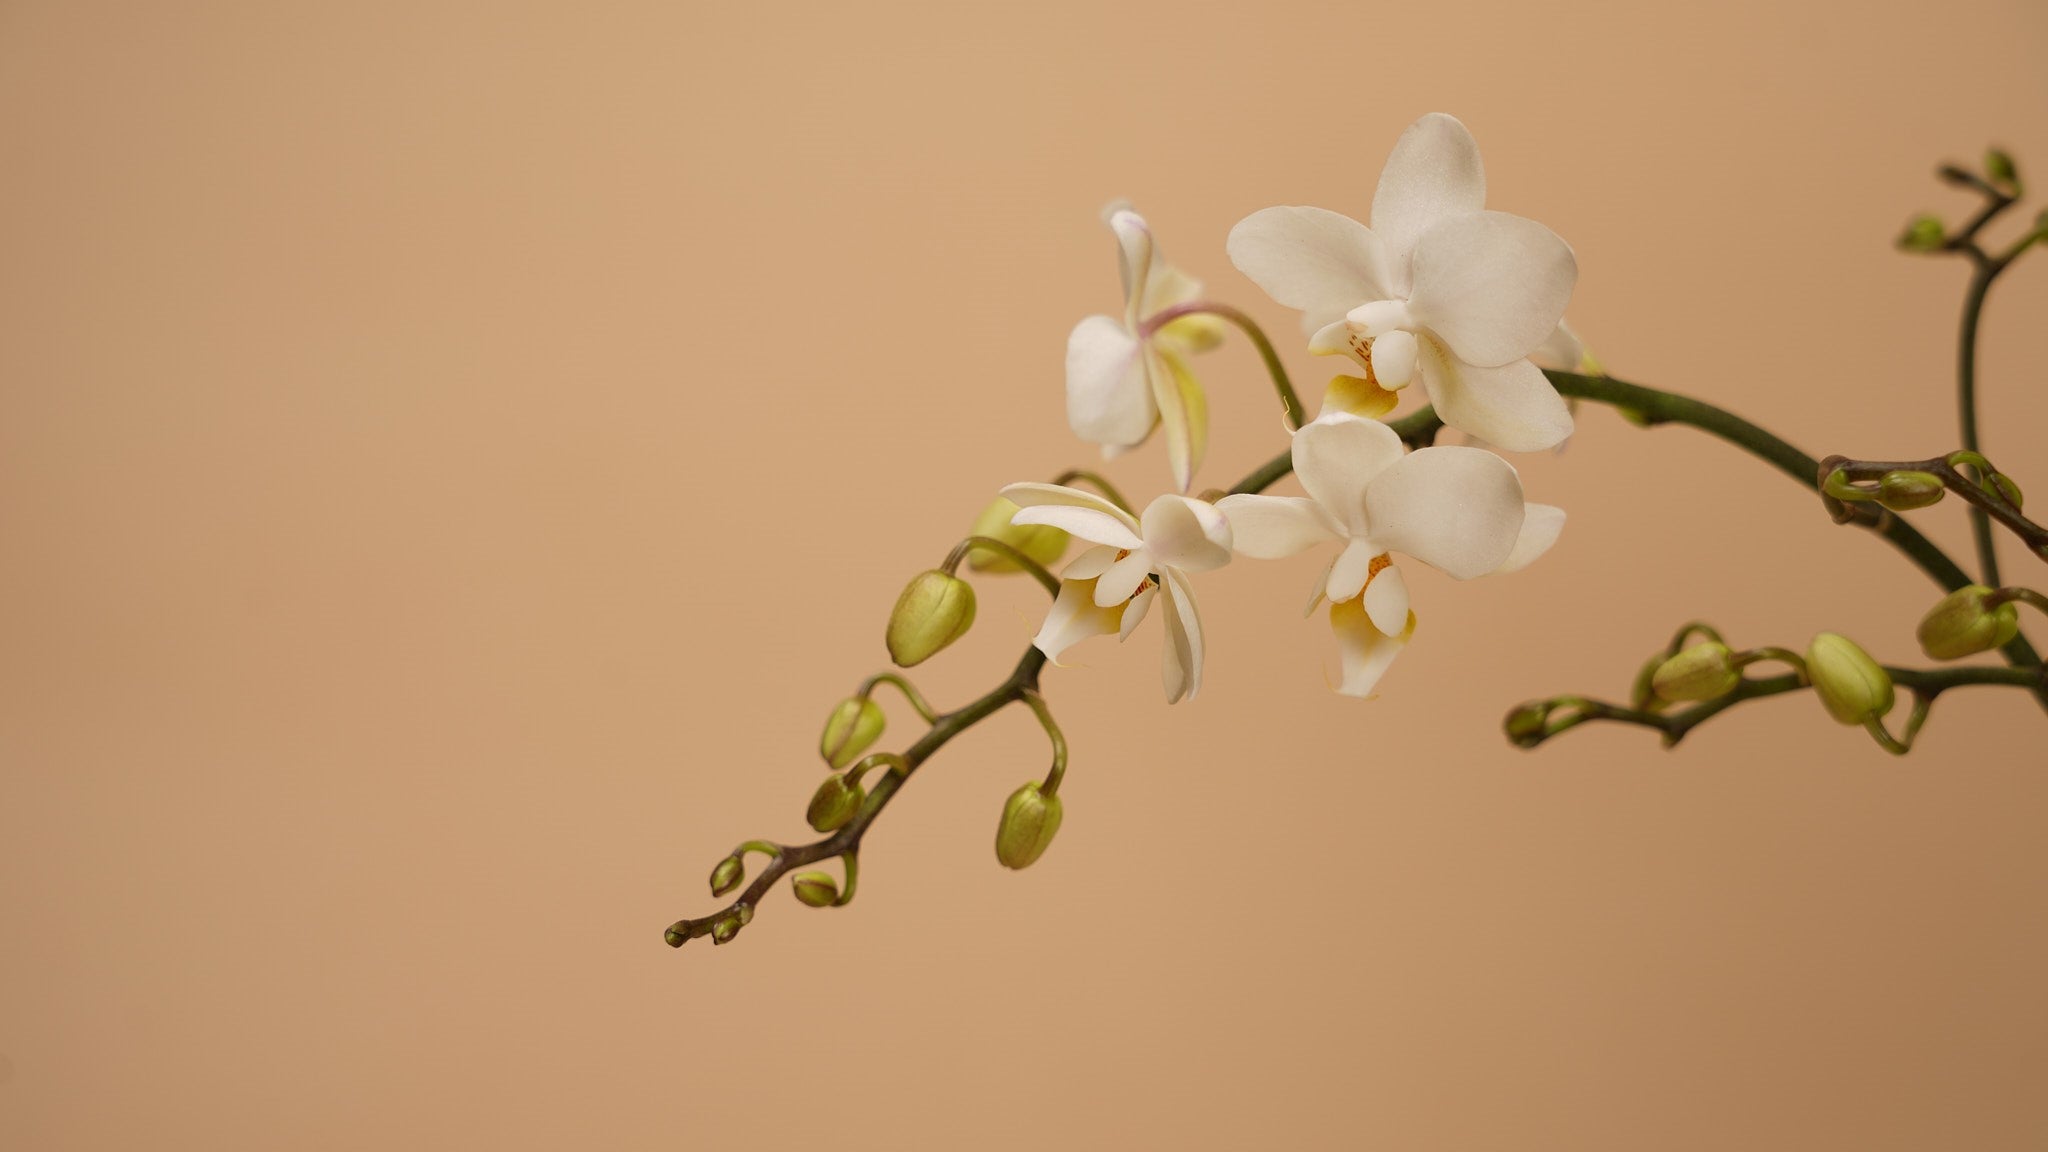 How To Take Care of Your Orchids